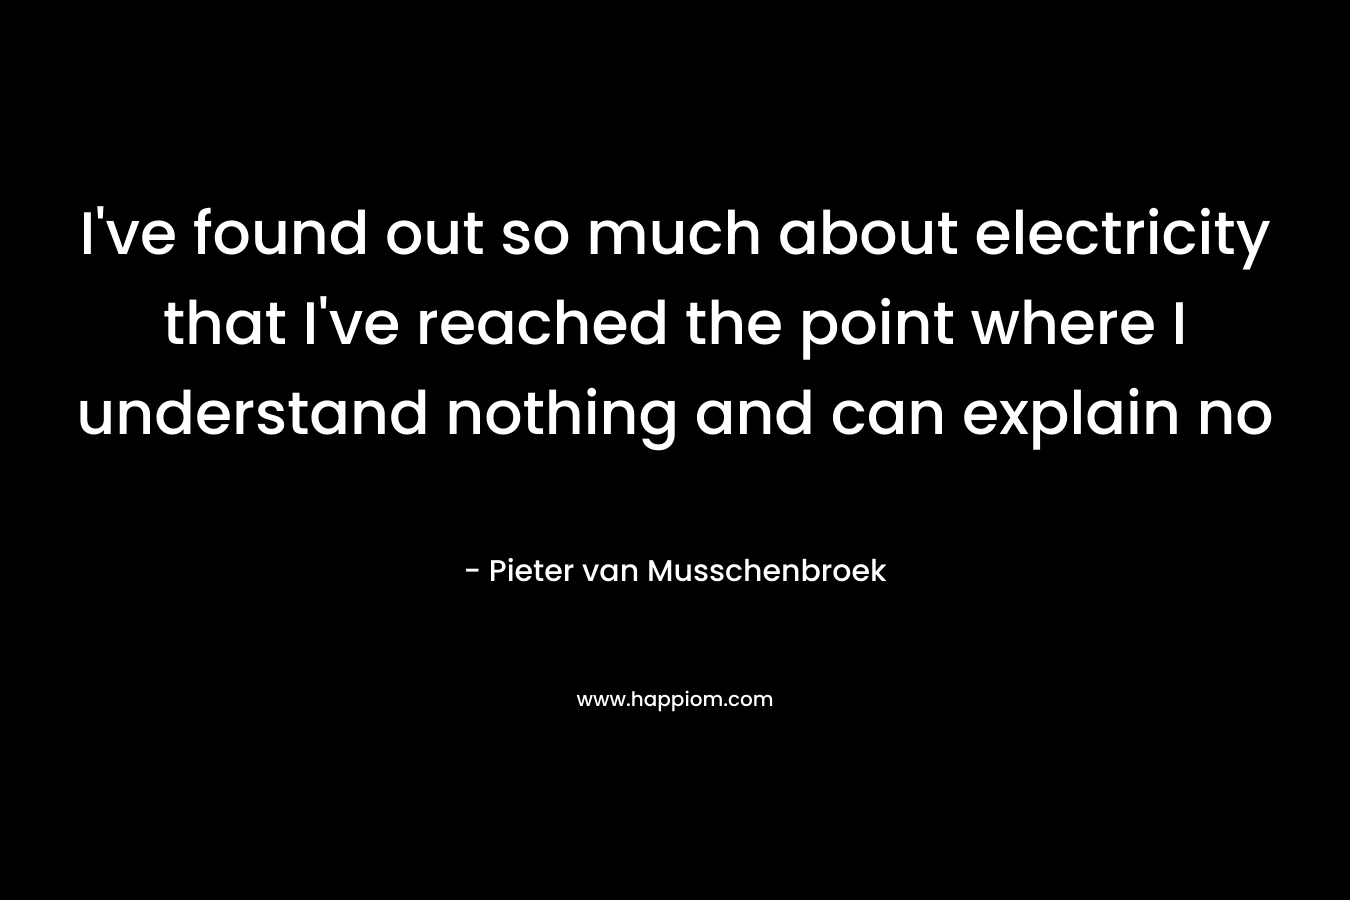 I’ve found out so much about electricity that I’ve reached the point where I understand nothing and can explain no – Pieter van Musschenbroek